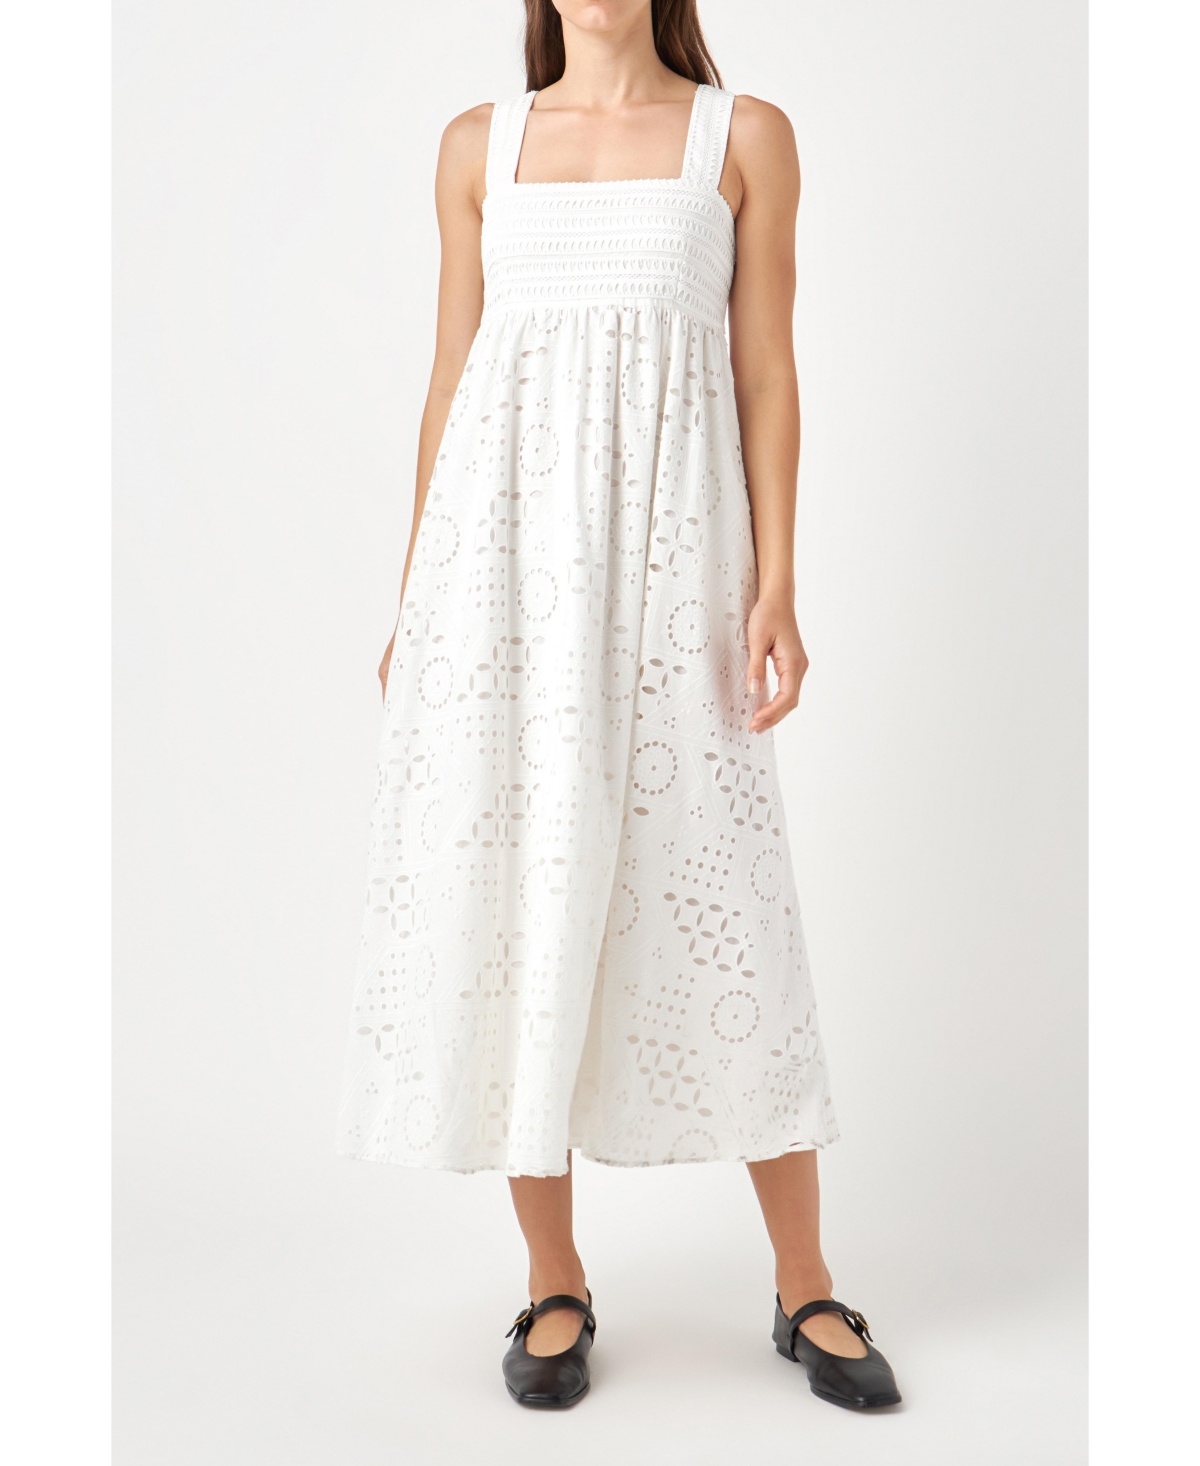 ENGLISH FACTORY WOMEN'S BRODERIE ANGLAISE MAXI DRESS